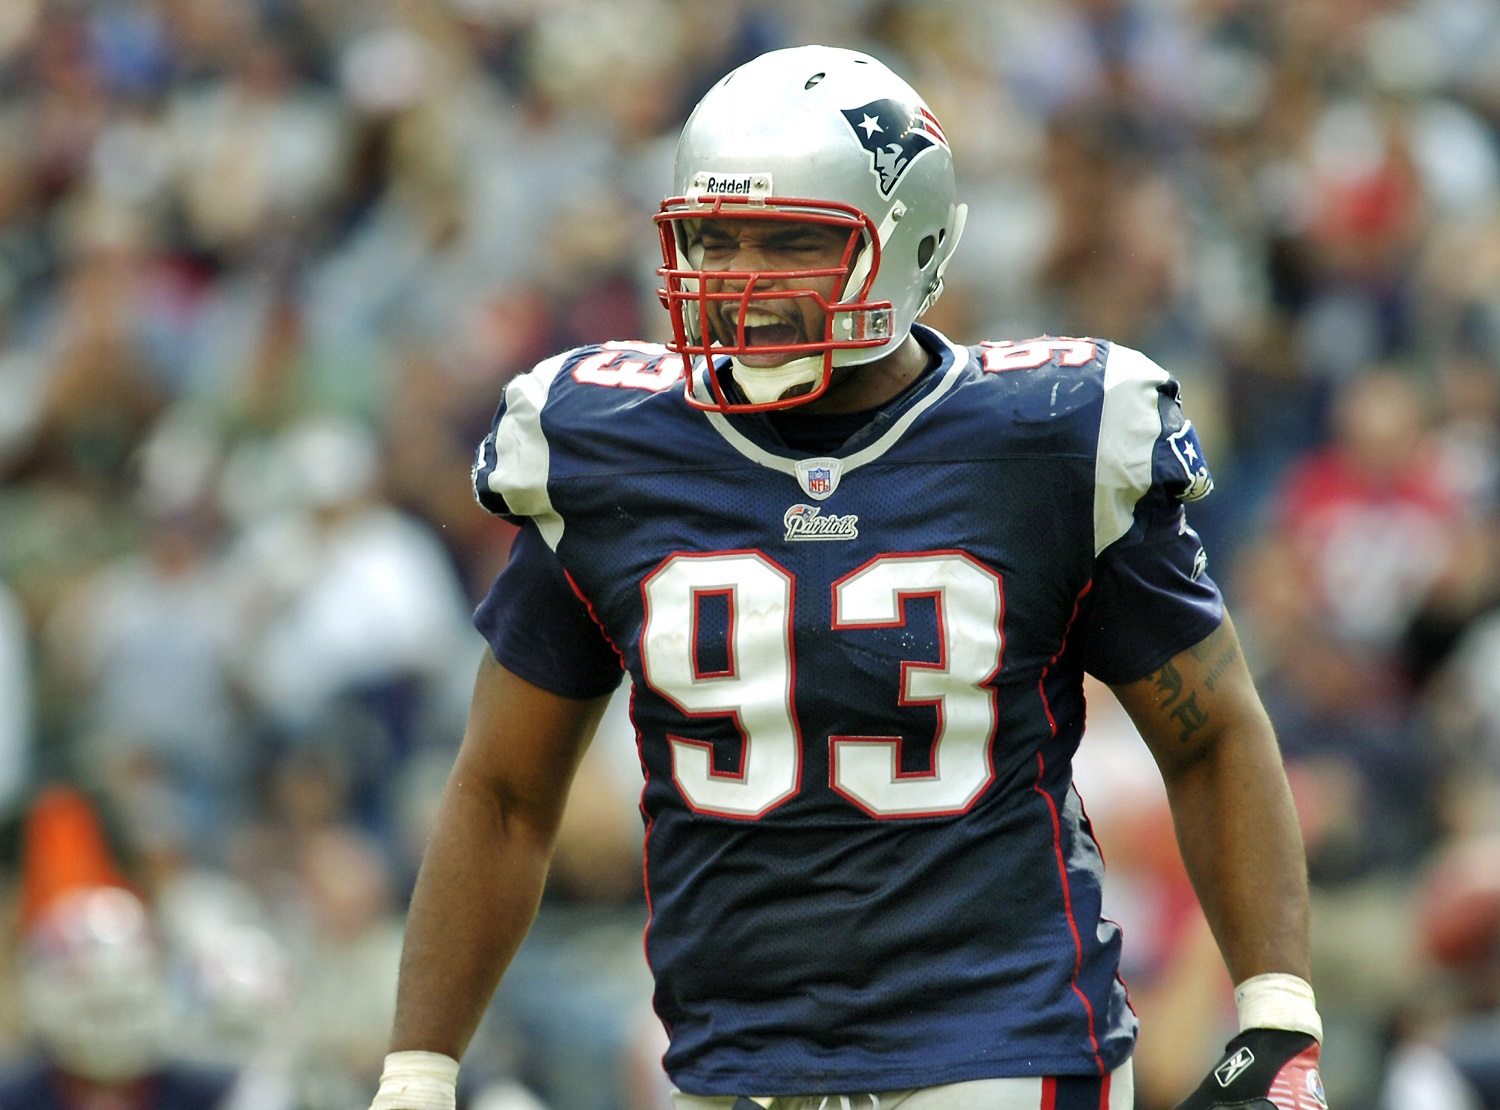 New England made Richard Seymour the sixth overall pick of the 2001 NFL Draft. The former University of Georgia star immediately helped the Patriots to three Super Bowl titles in four years, highlighting his Pro Football Hall of Fame resume. | Michael Valeri/Getty Images